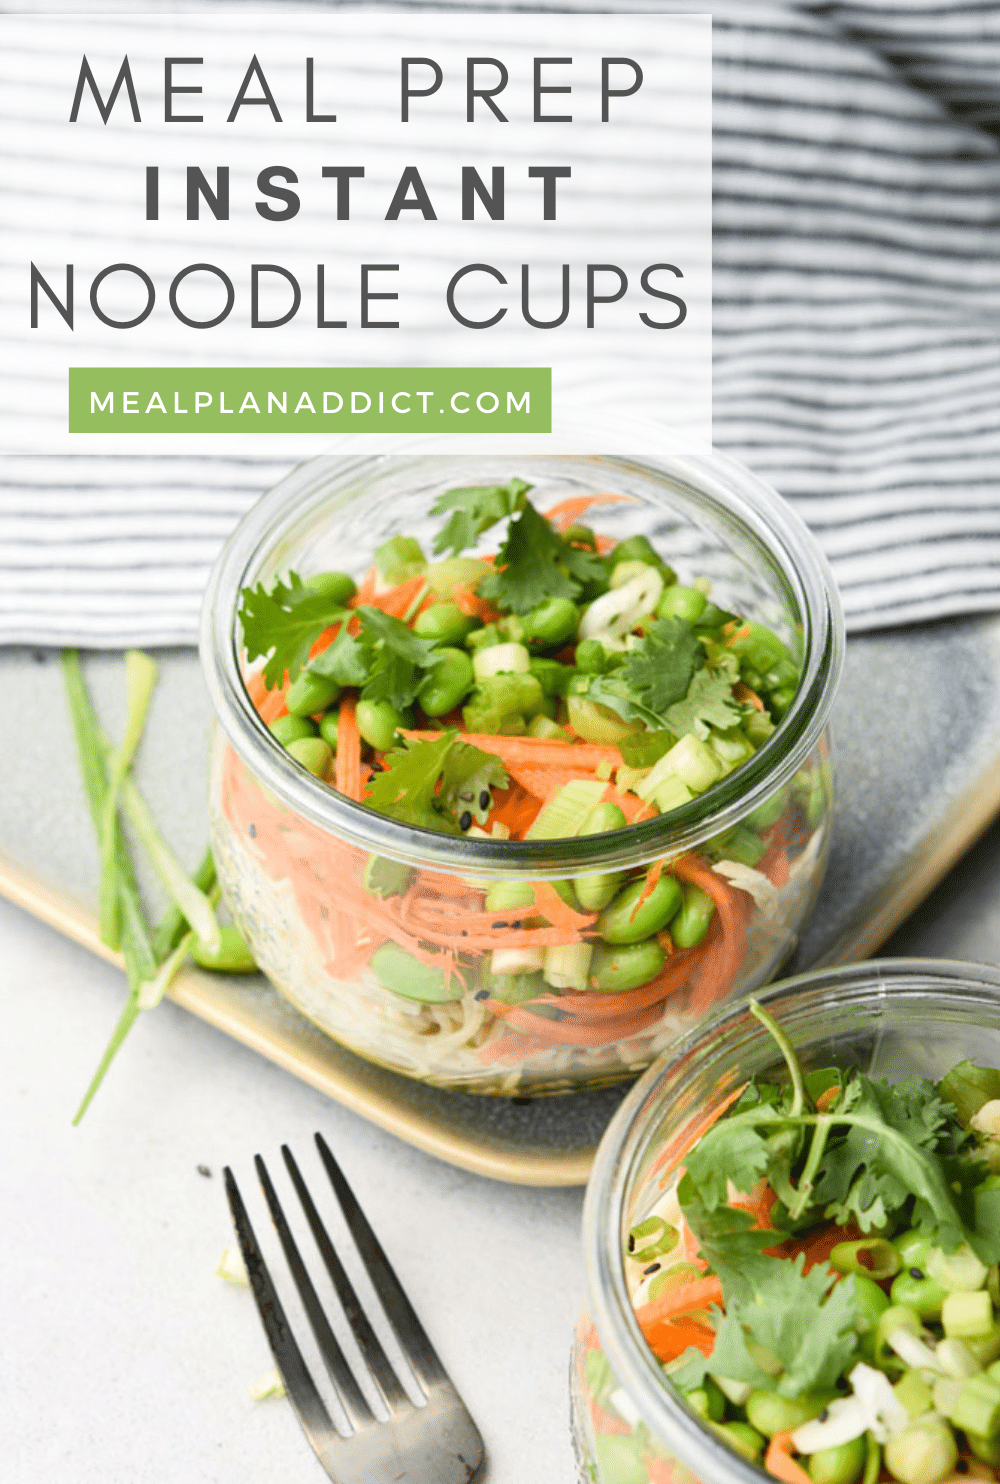 Noodle Cup pin for Pinterest